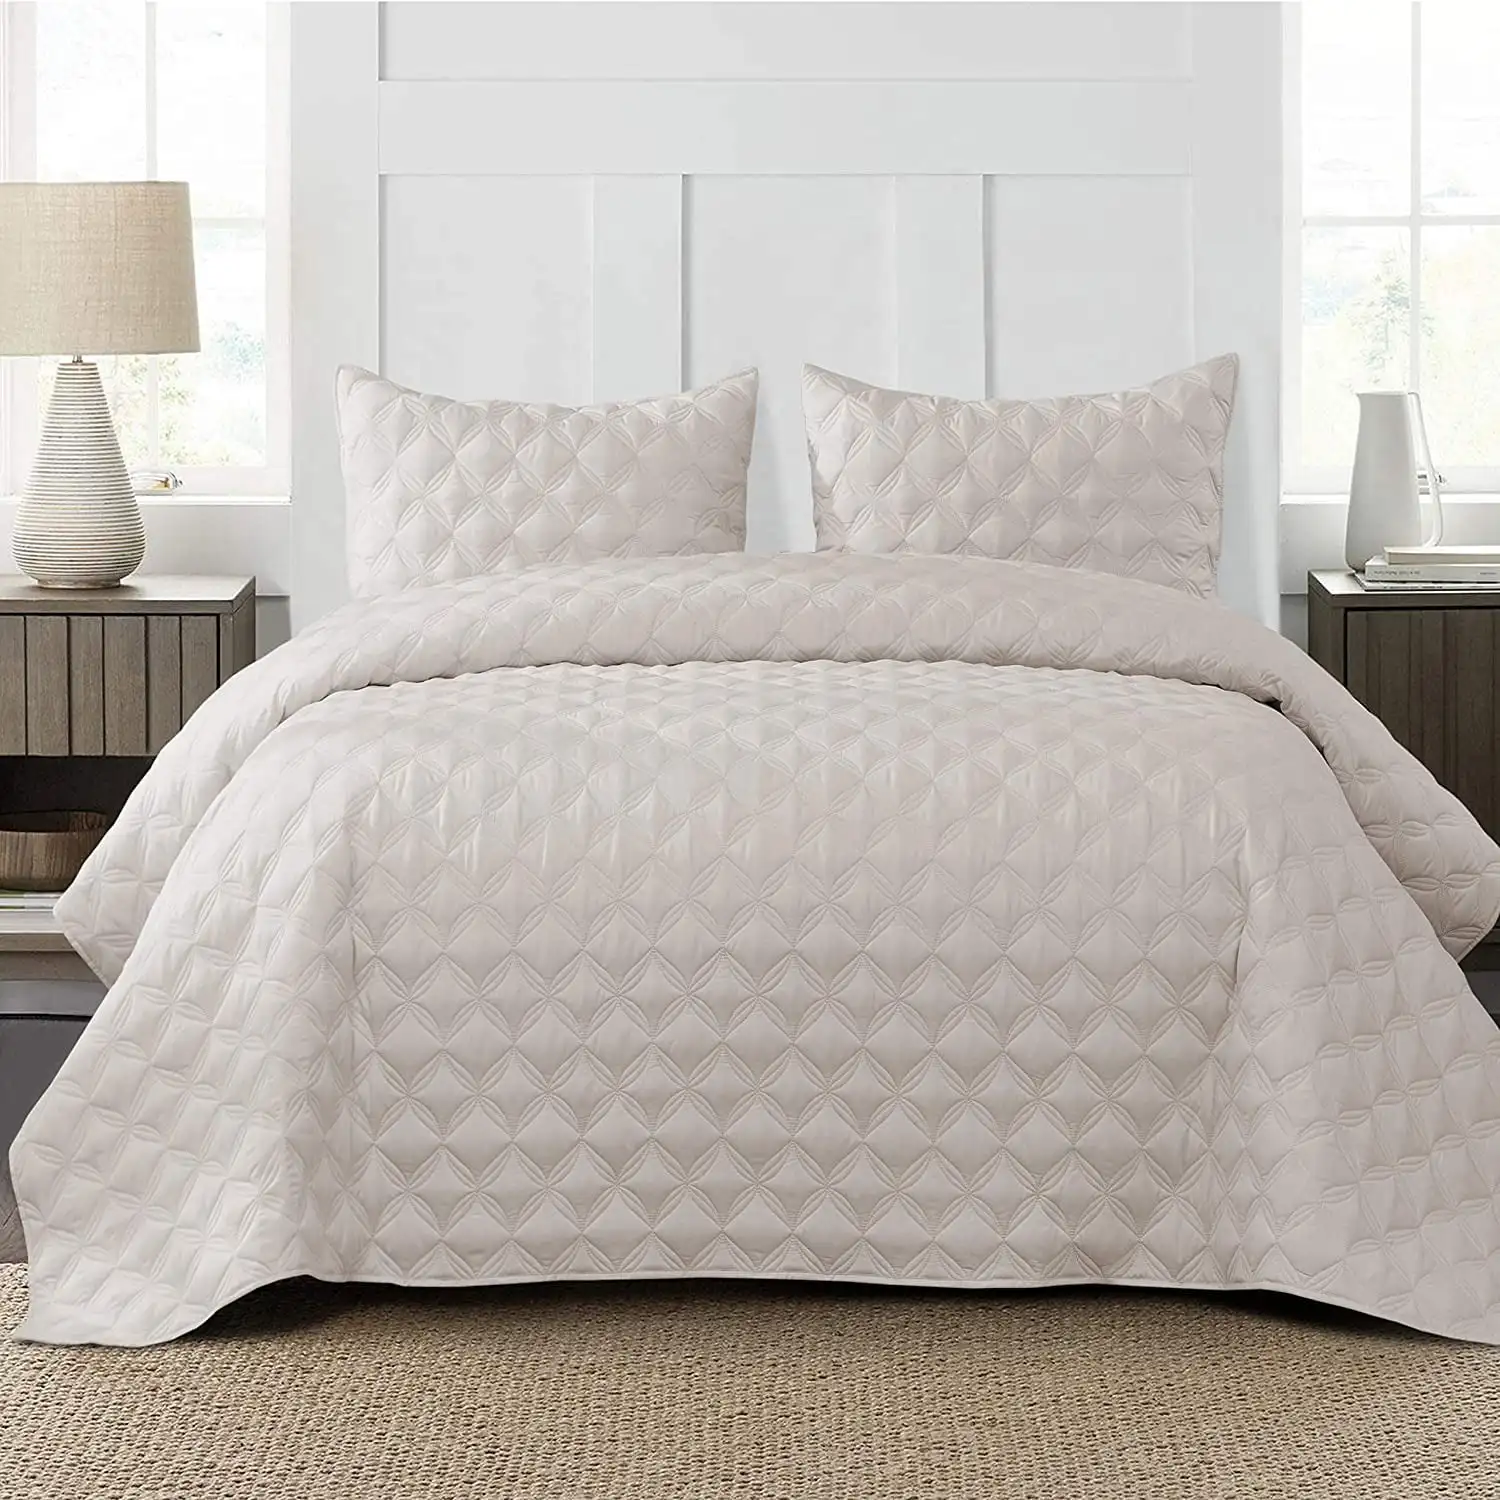 

Exclusivo Mezcla Bed Quilt Set King Size for All Season, Stitched Pattern Quilted Bedspread/ Bedding Set/ Coverlet with 2 Pillow